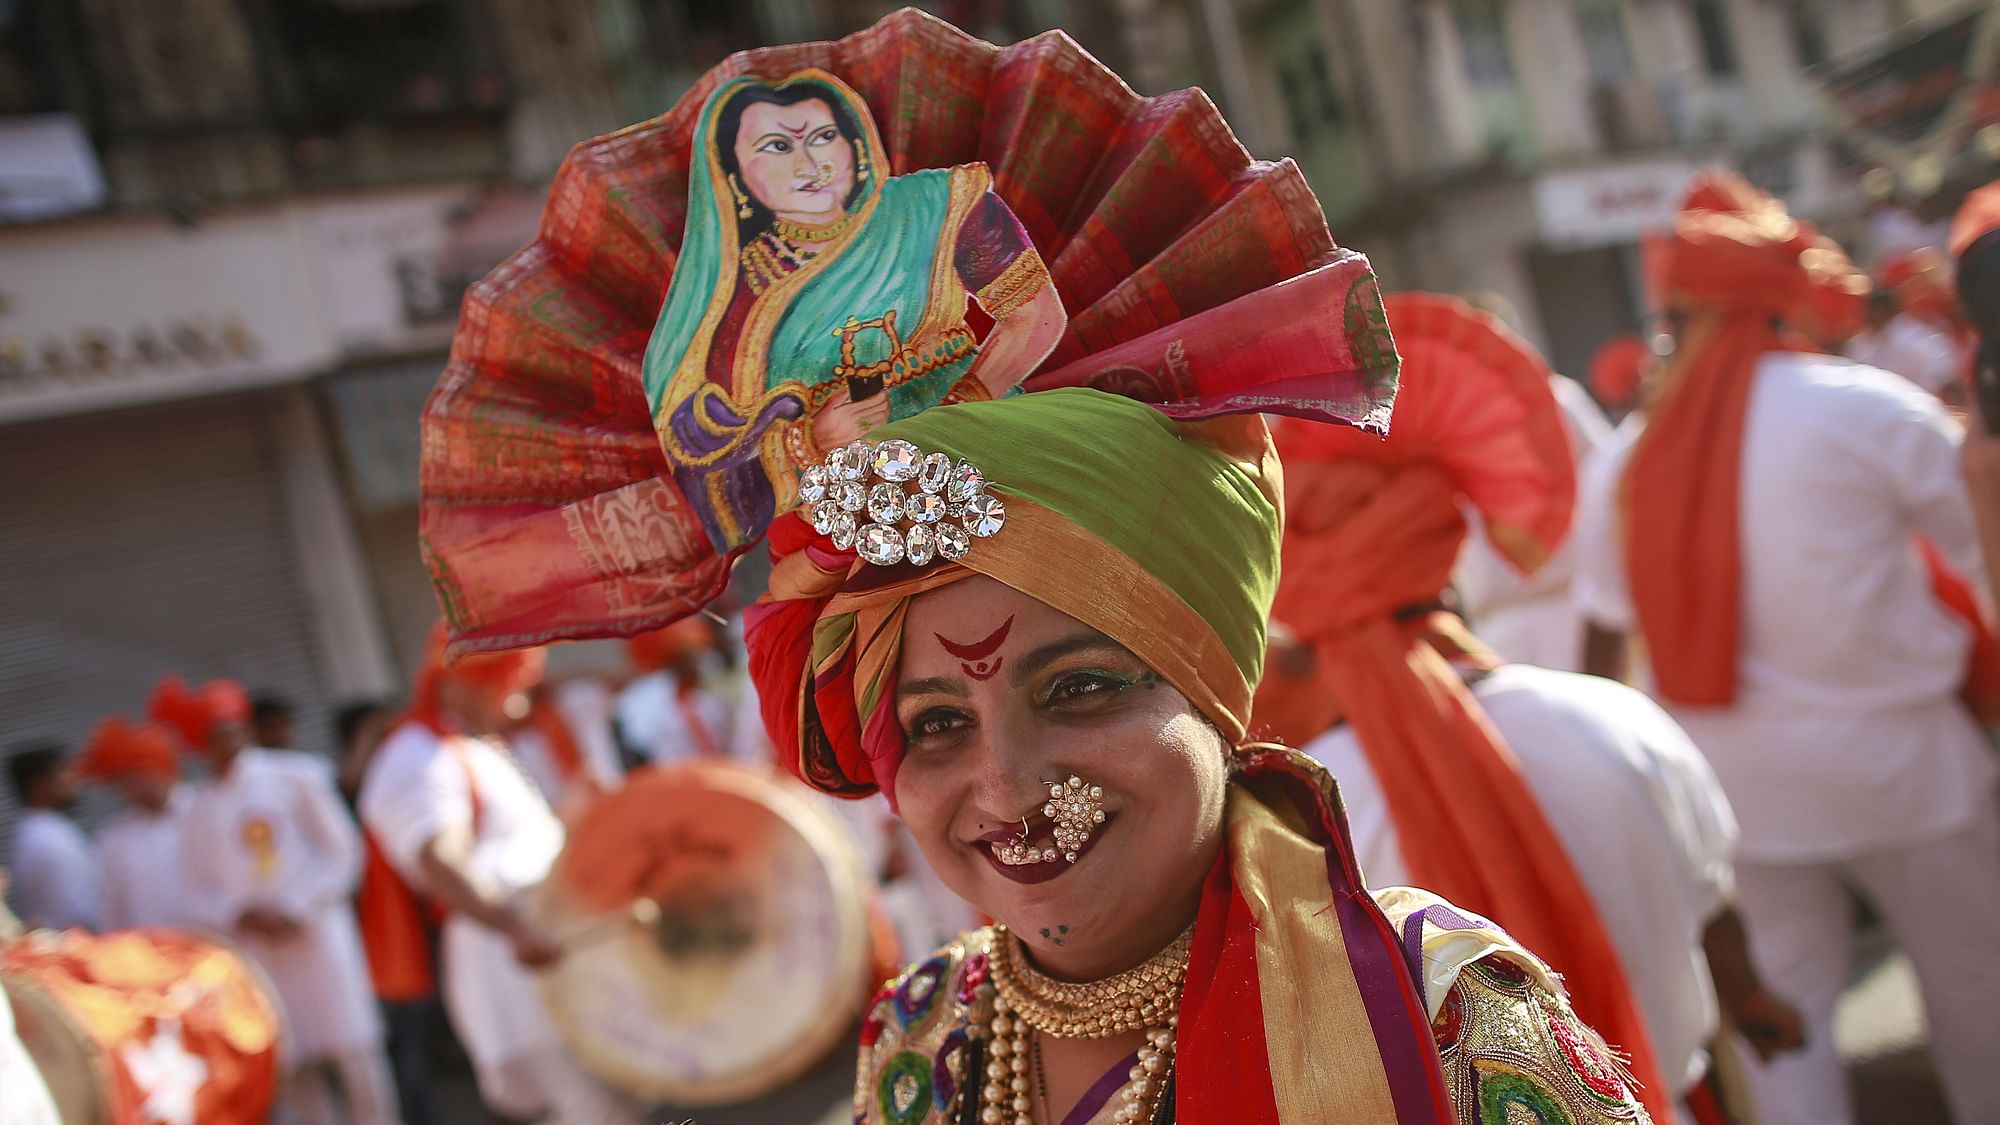 A Maharashtrian woman dressed in traditional costume attends celebrations to mark the Gudi Padwa festival in Mumbai on 8 April 2016.